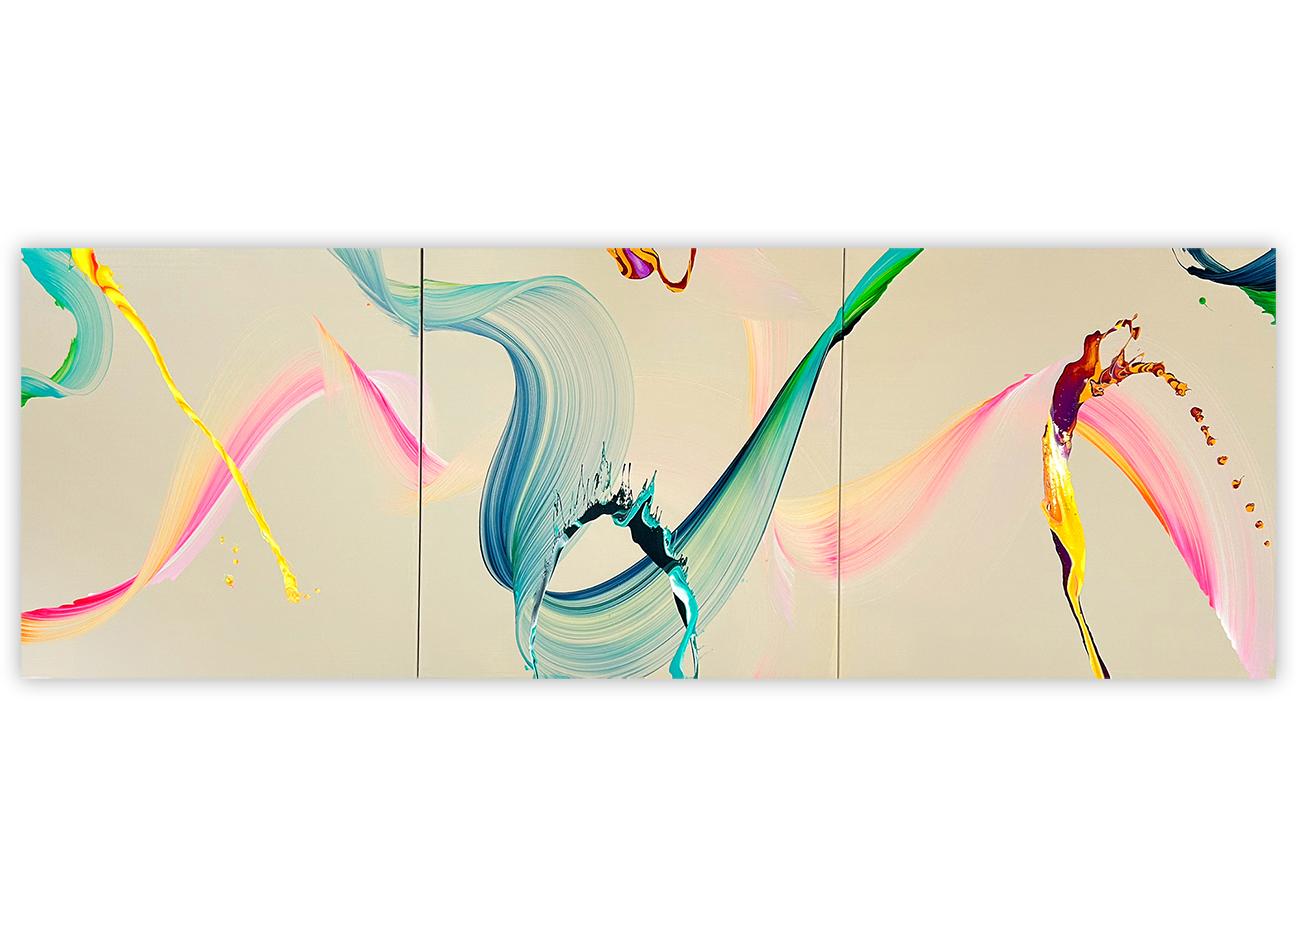 Nikolaos Schizas Abstract Painting – For Ever, Together (Triptychon) (Abstrakte Malerei)